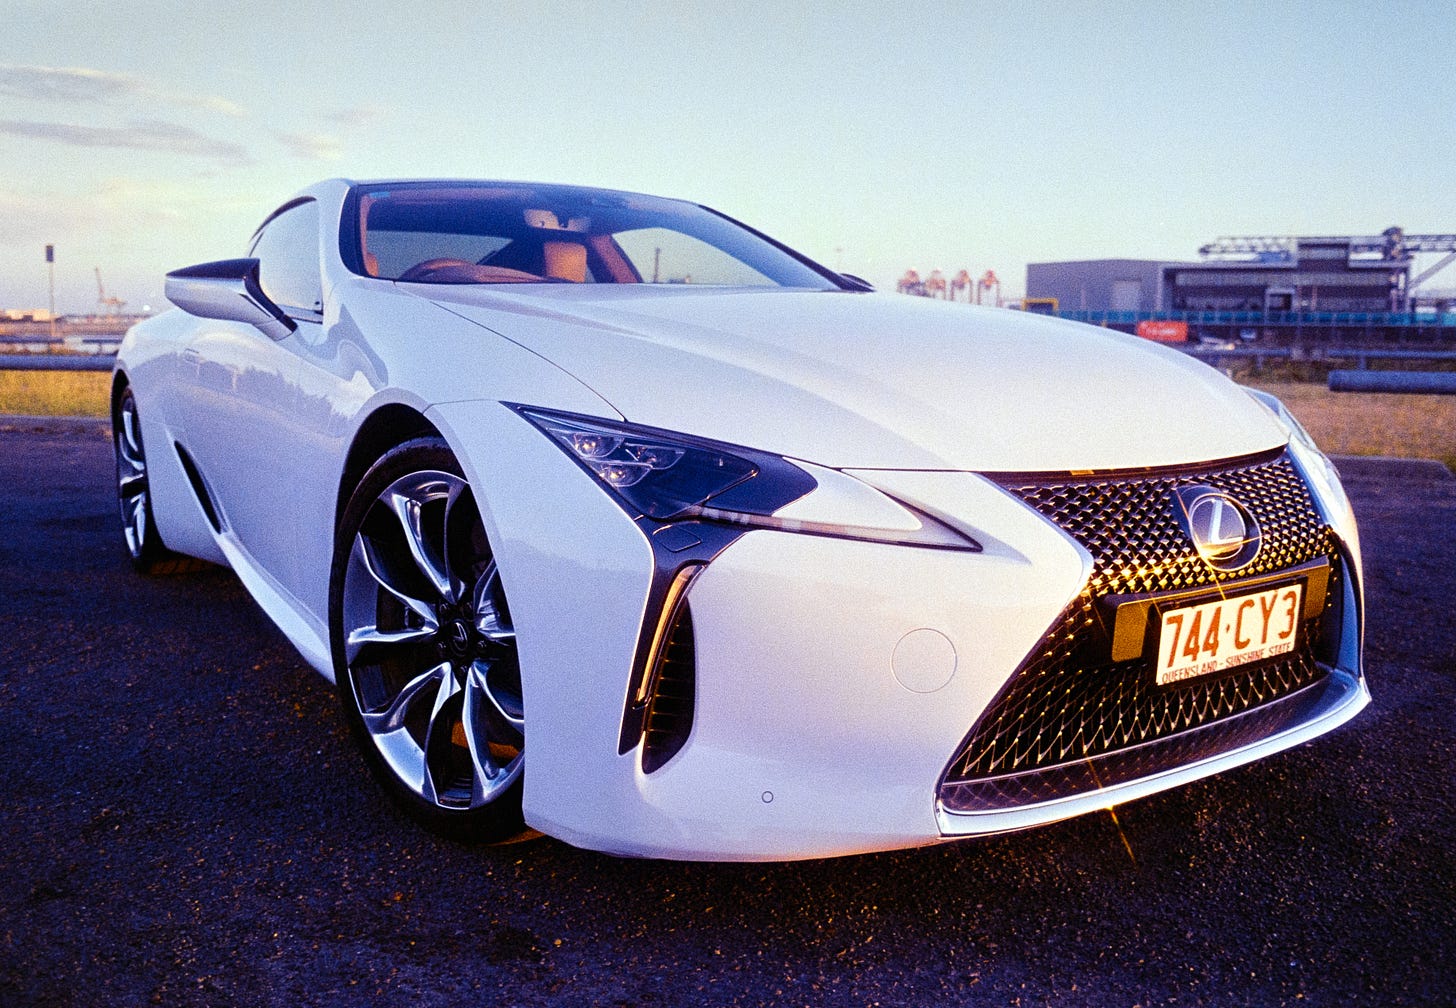 Clem's Lexus LC500 shot with a wide angle lens with the golden sunset reflecting off the car